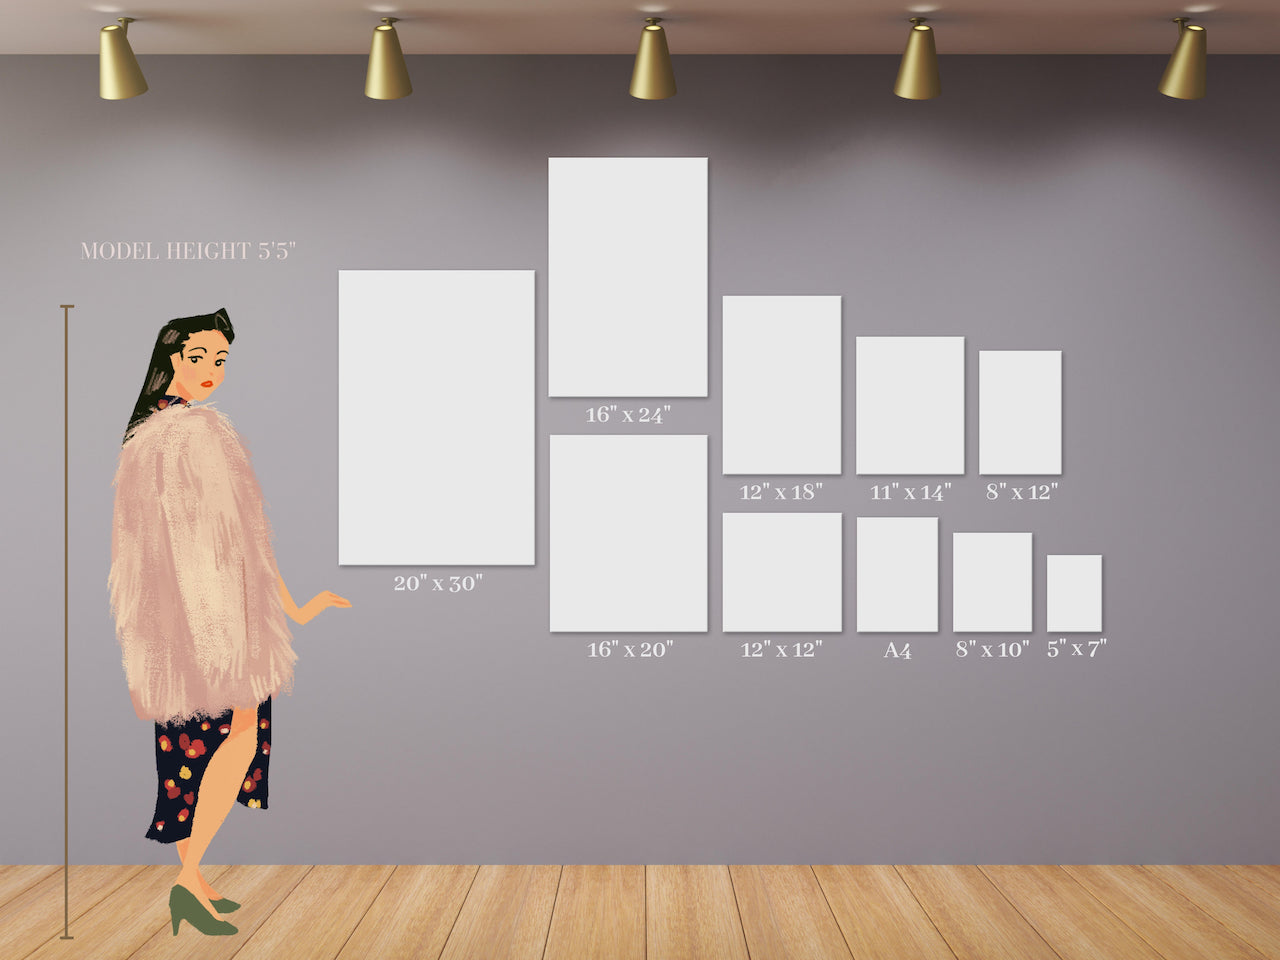 Using the guide with a human figure helps to see the proportions of the artwork sizes